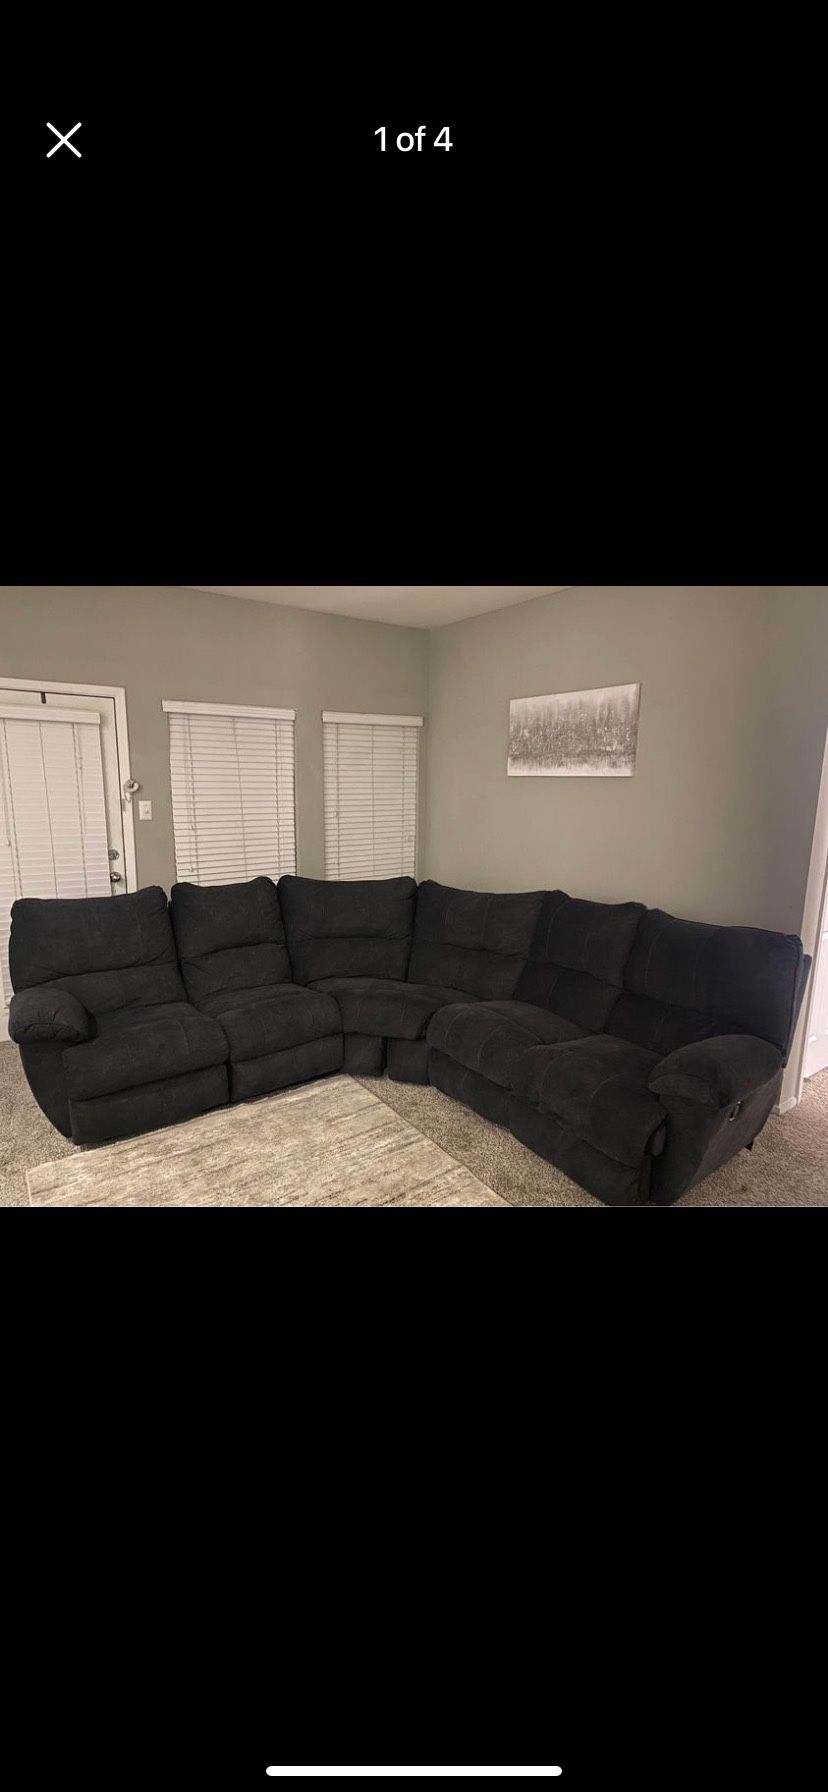 Dark Blue Couch With Recliners At The End